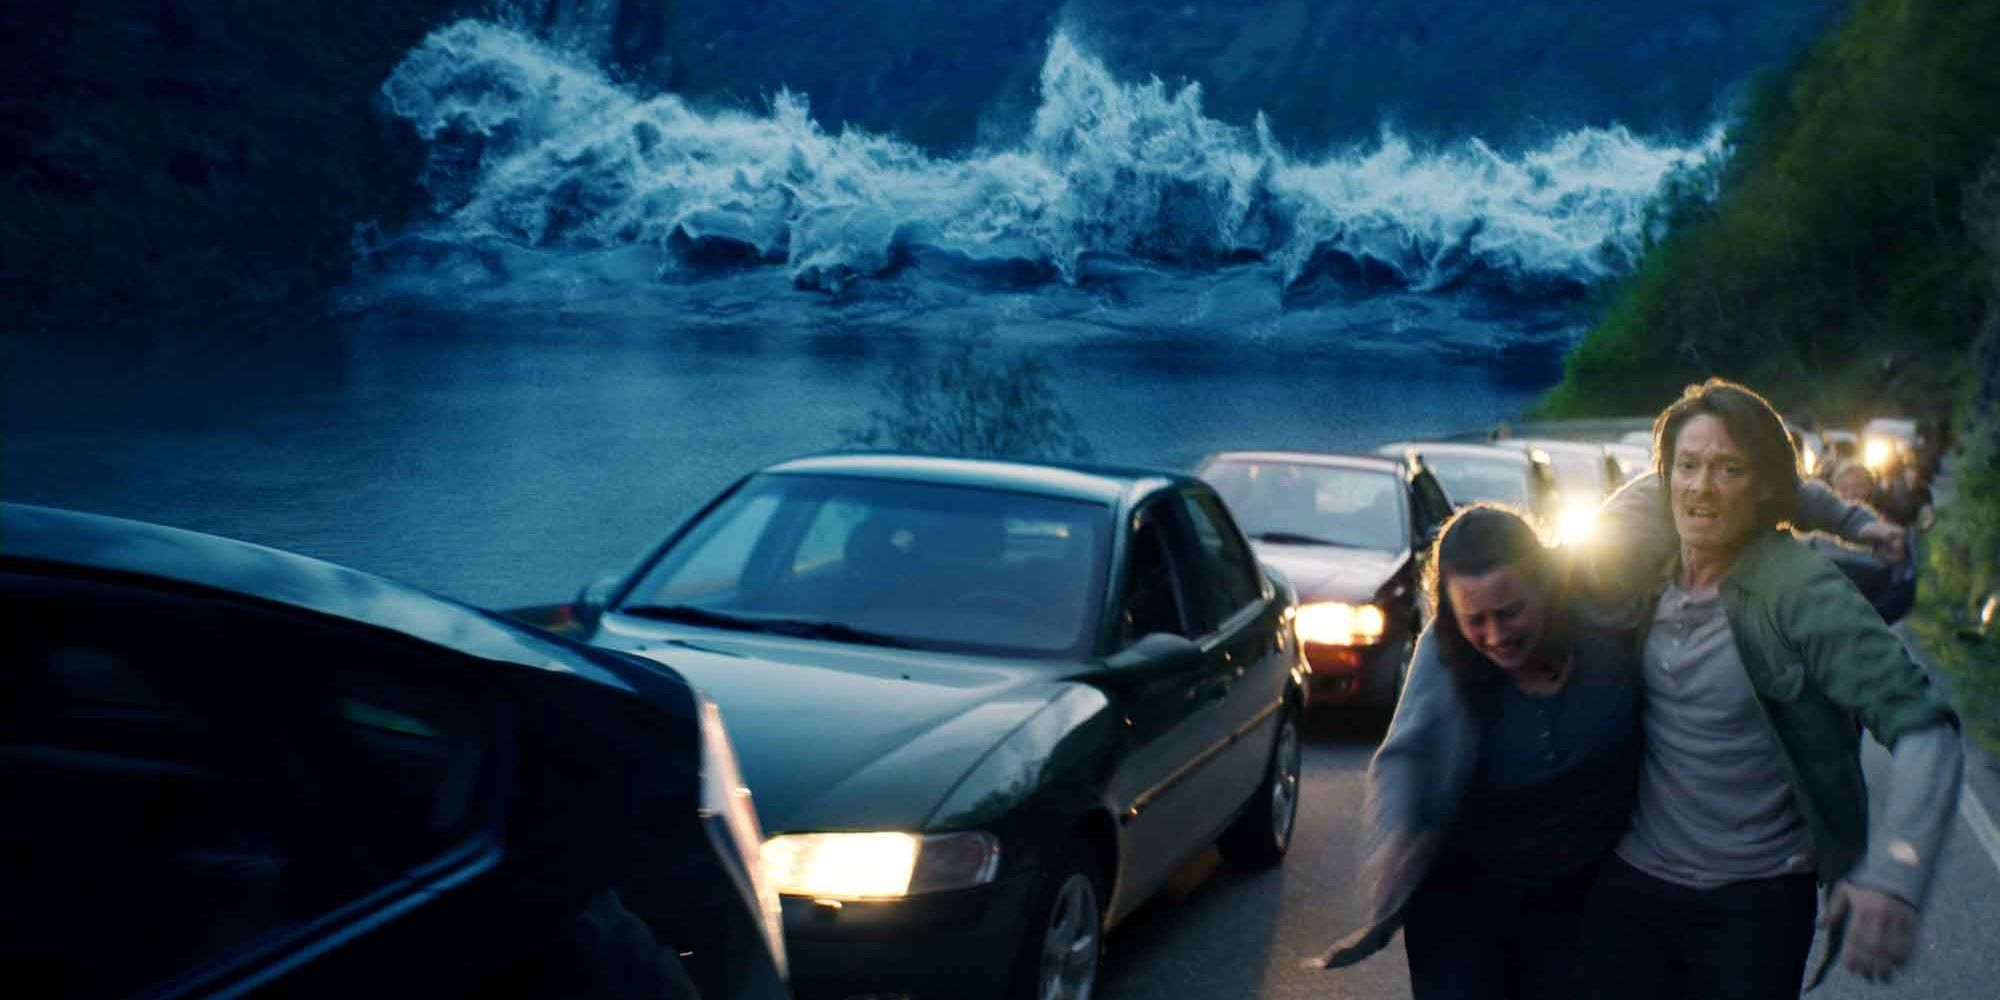 Gerry helps a woman down an abandoned road as a large wave approaches